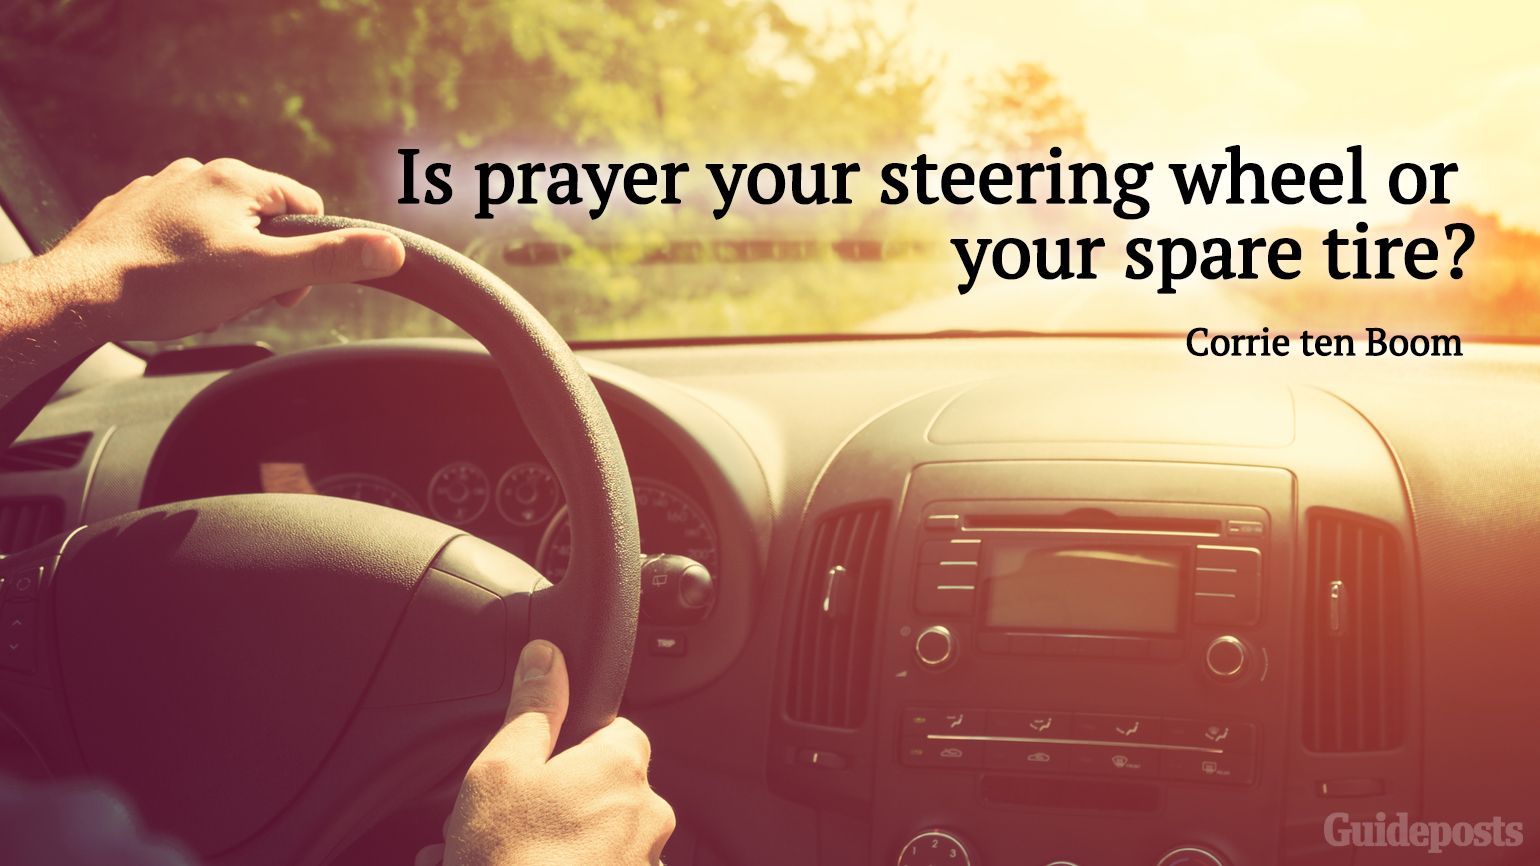 "Is prayer your steering wheel or your spare tire?" Inspiring Corrie ten Boom quotes